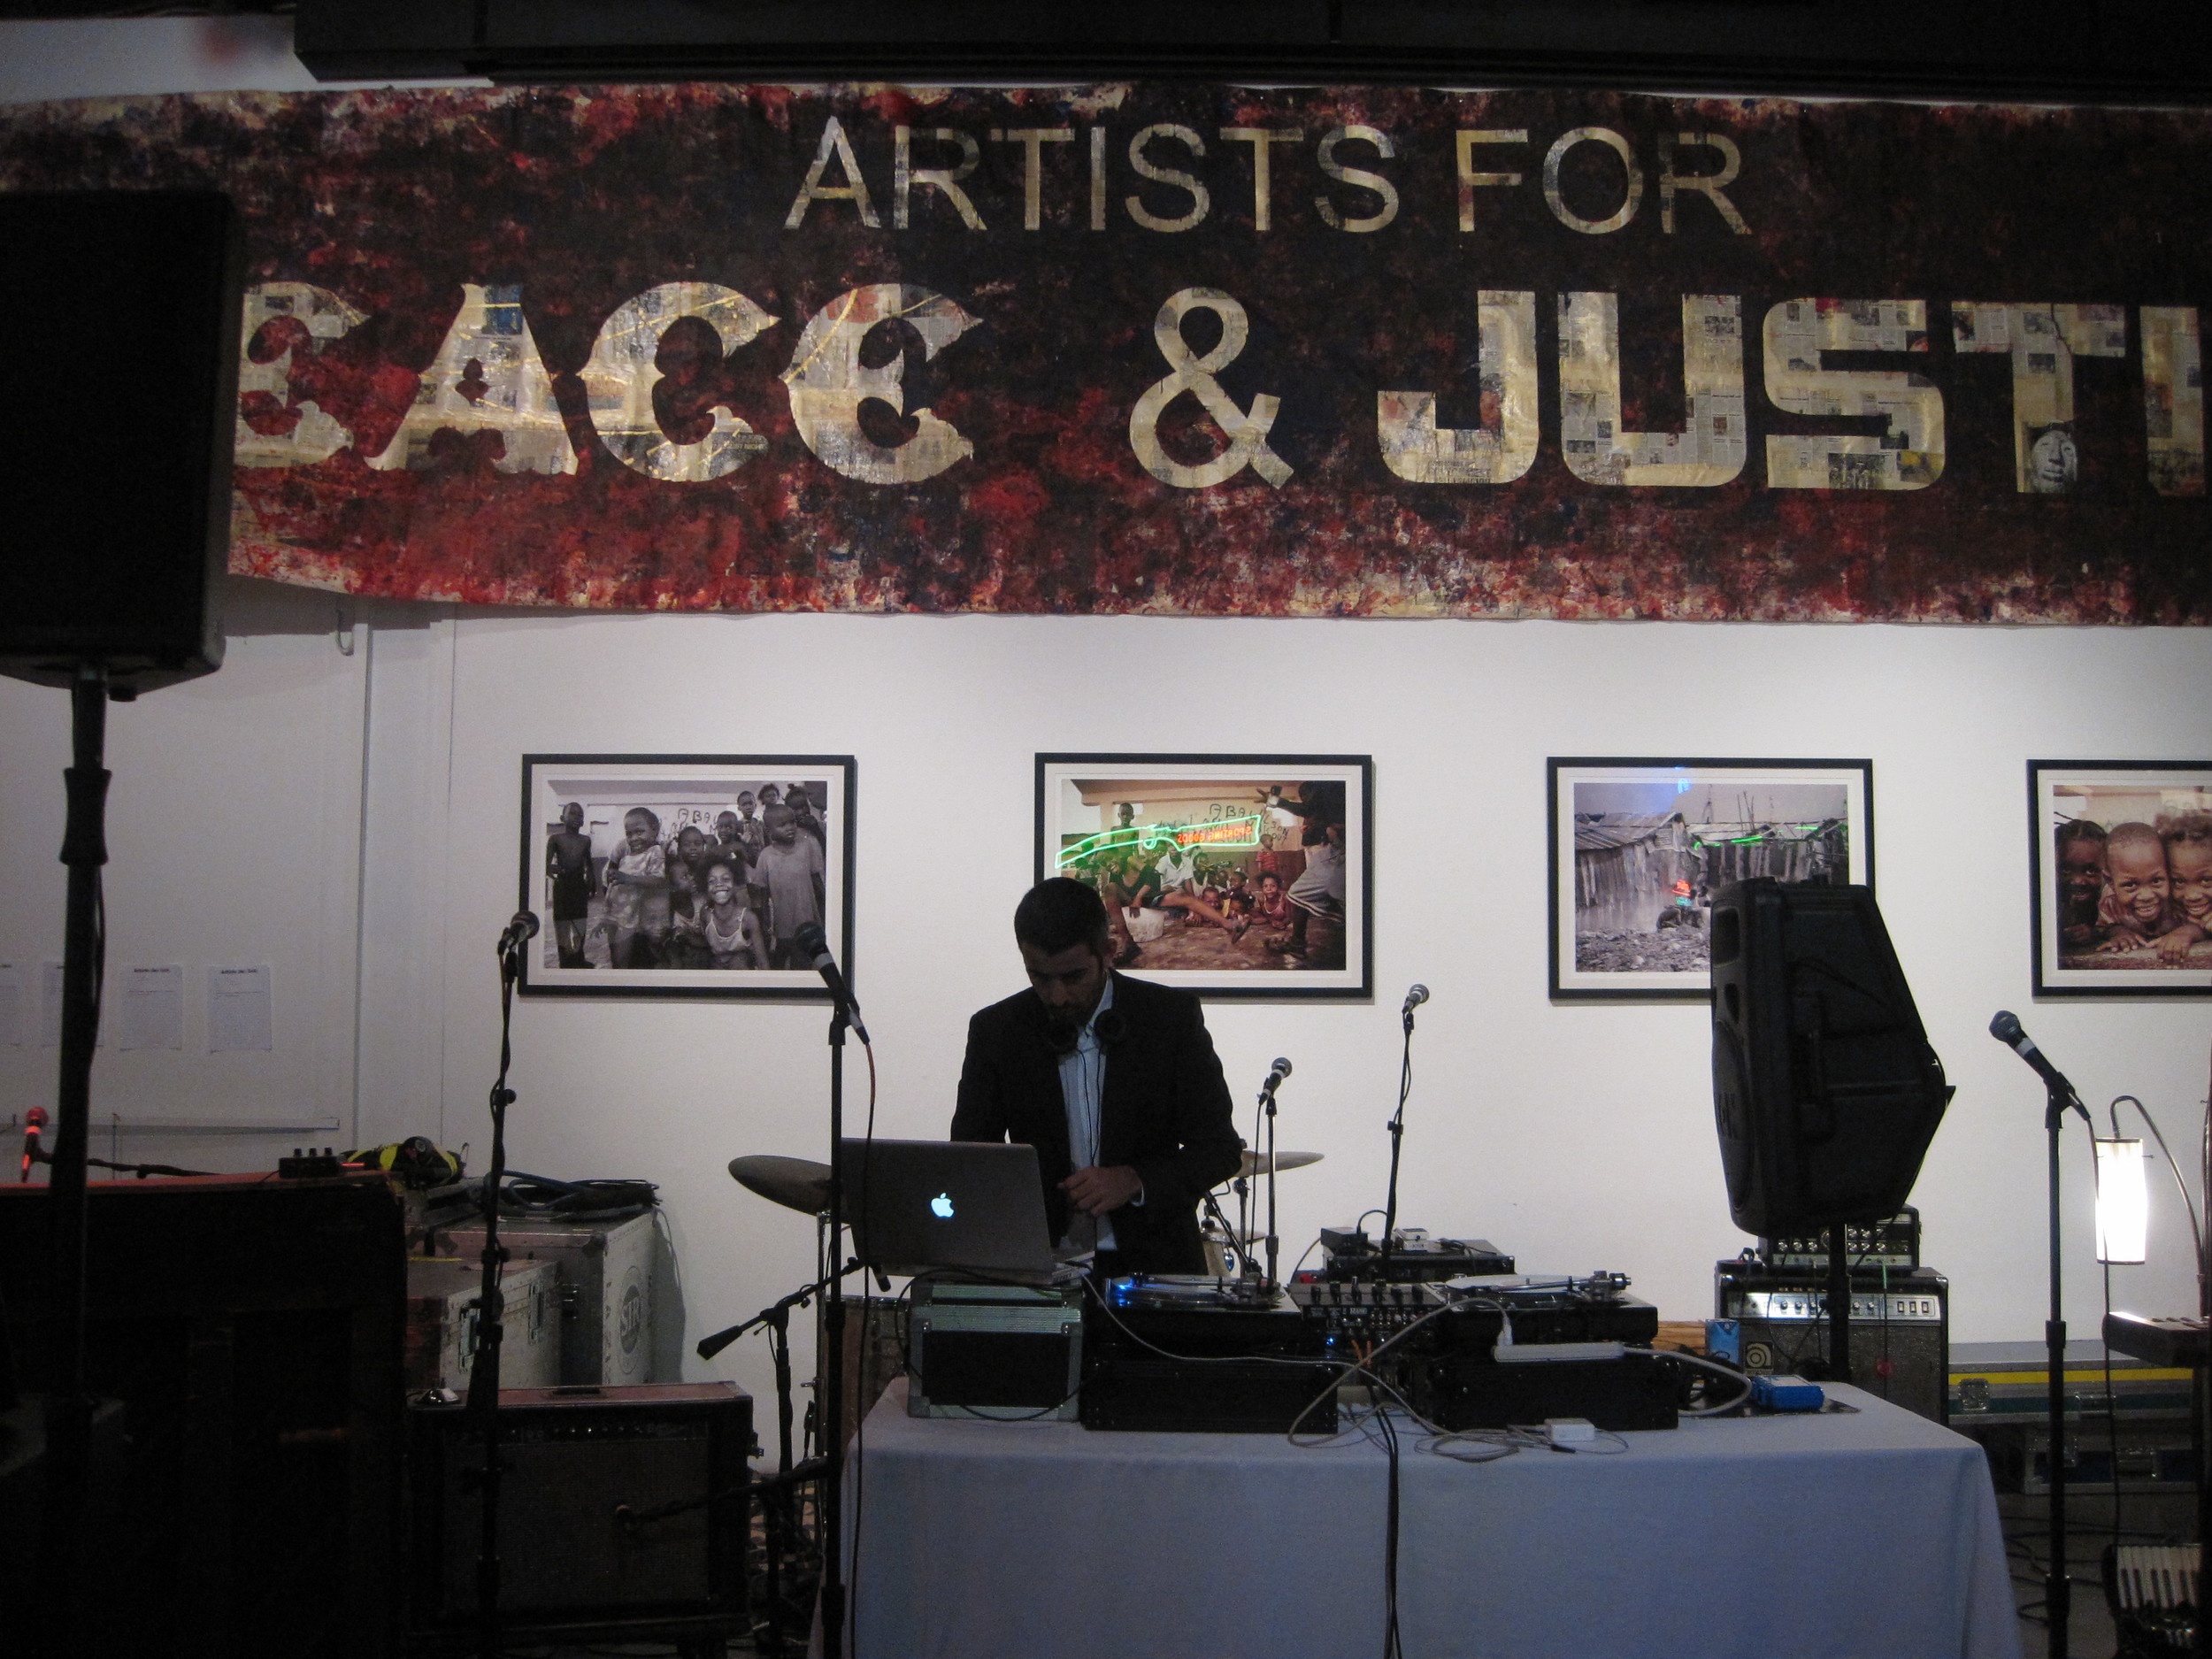 Artists for Peace and Justice Haiti Benefit